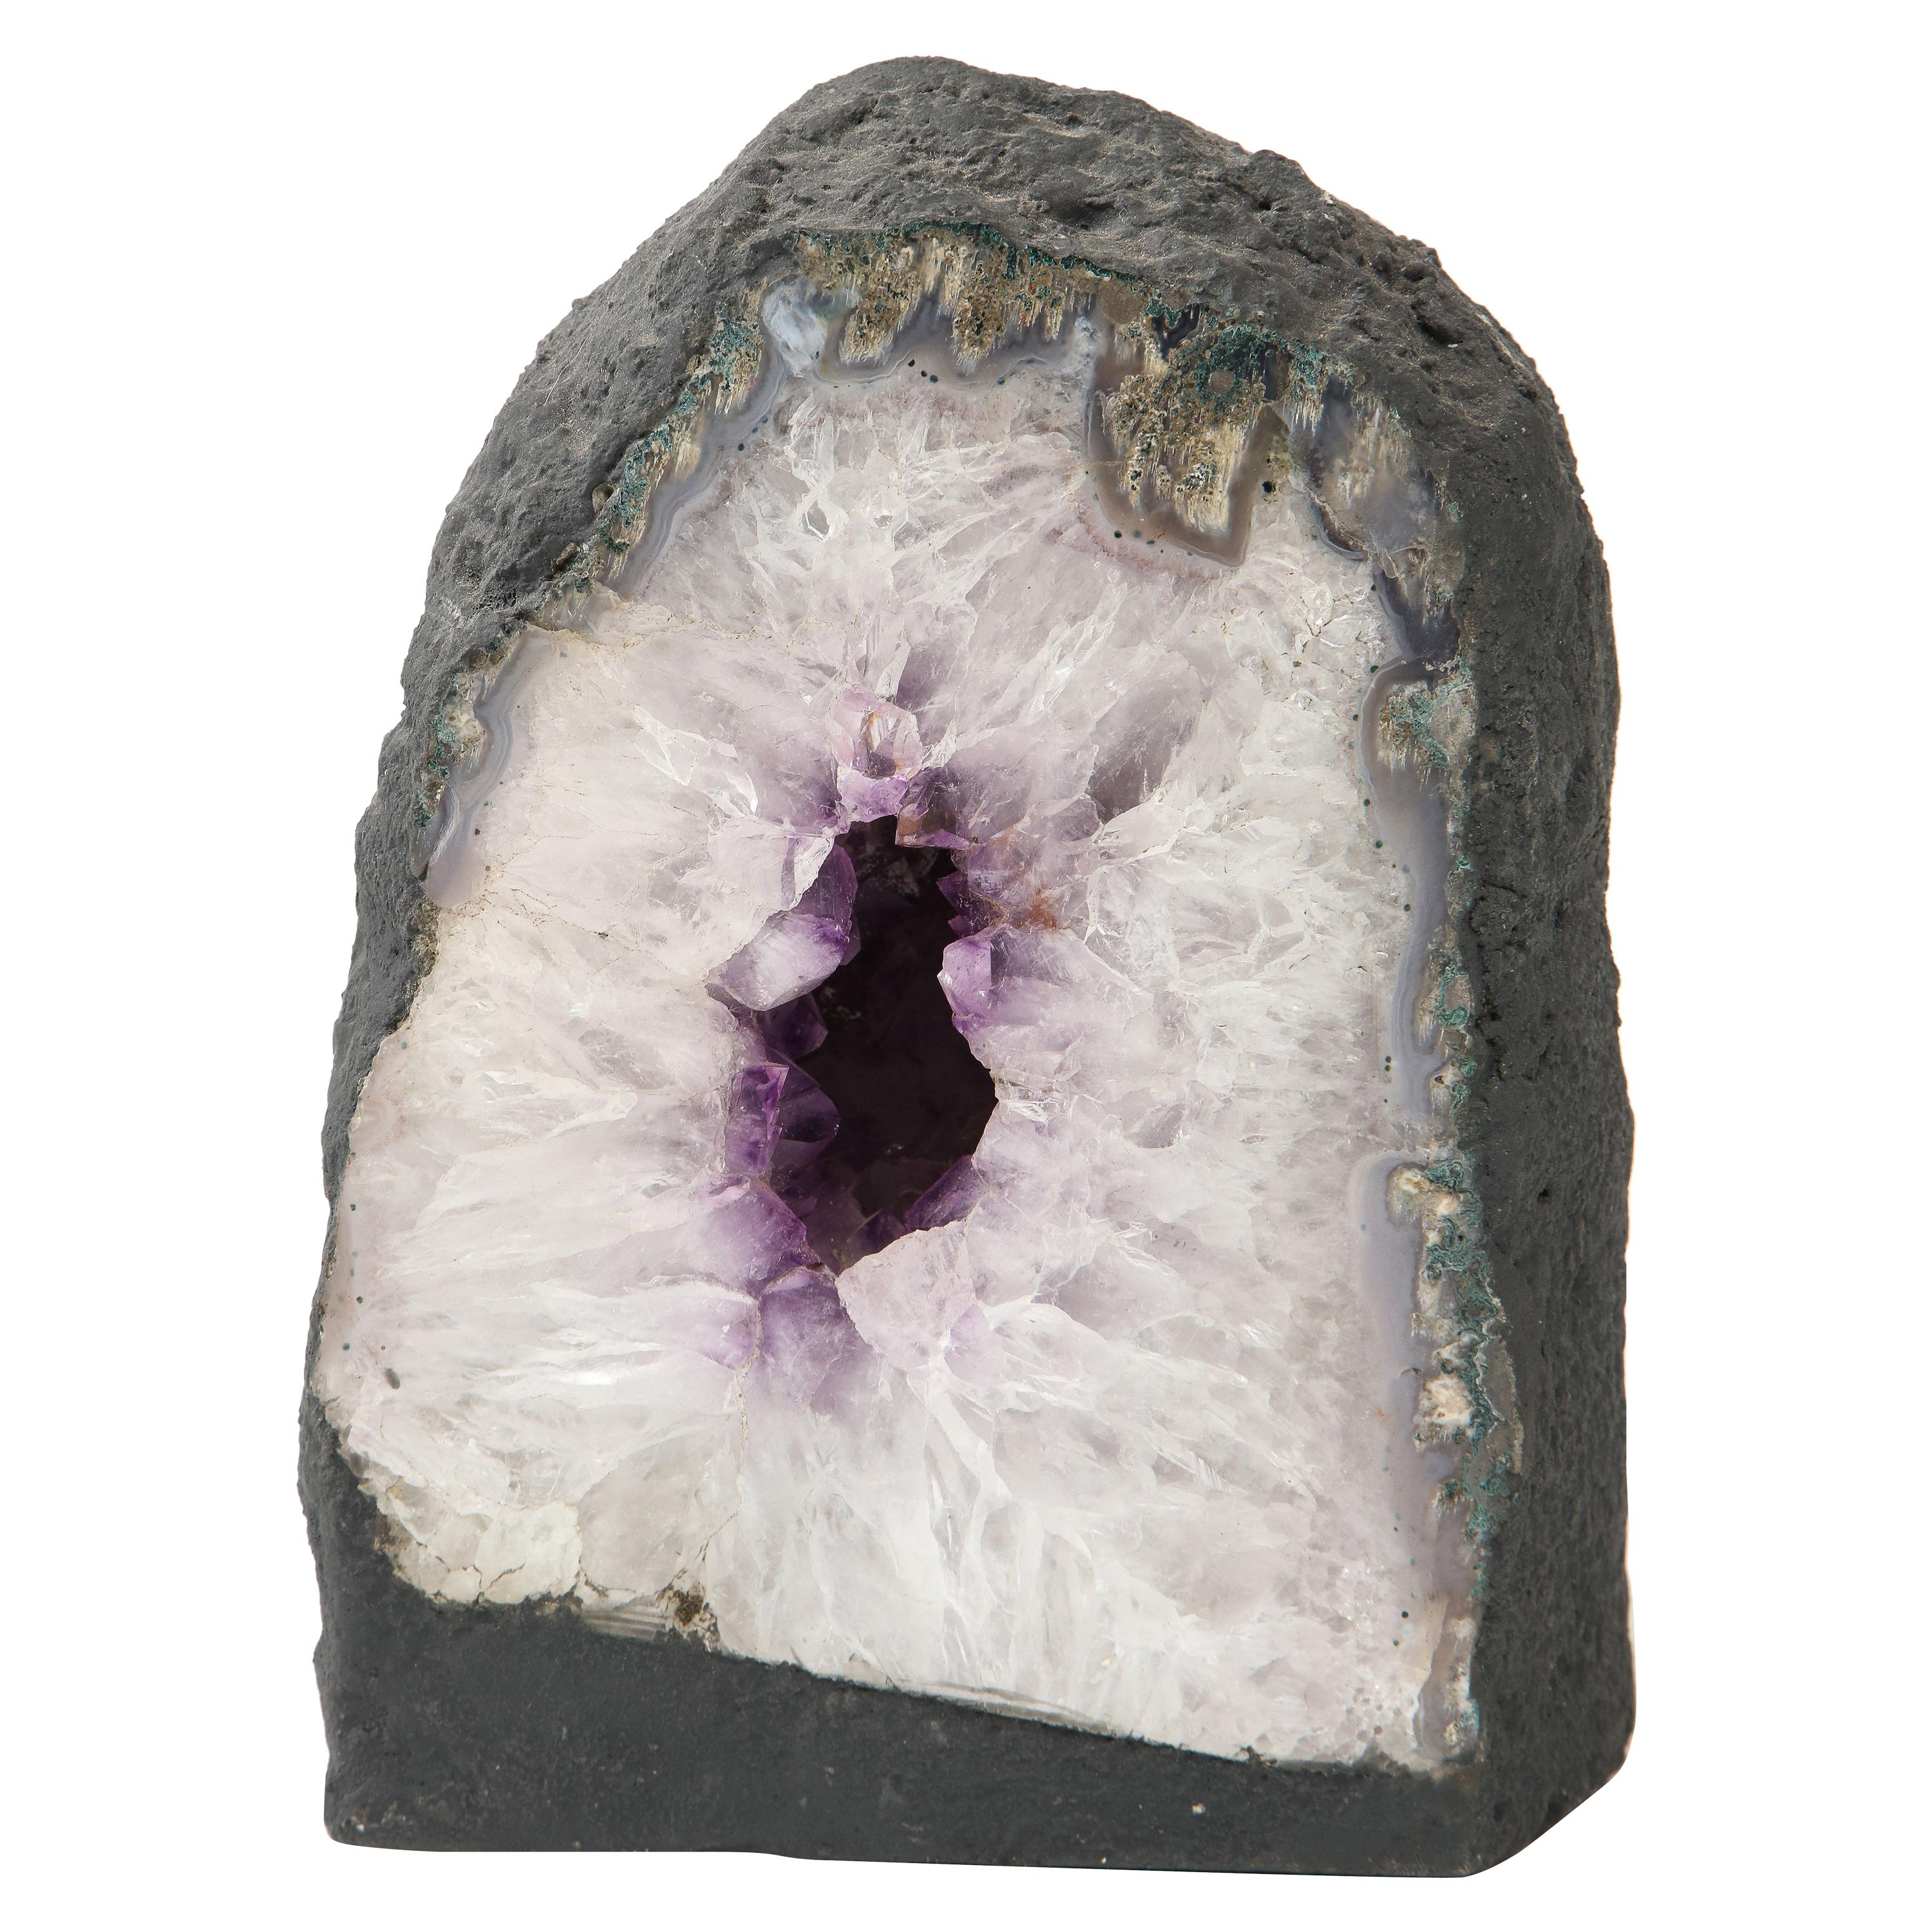 What is the purple crystal in a geode?